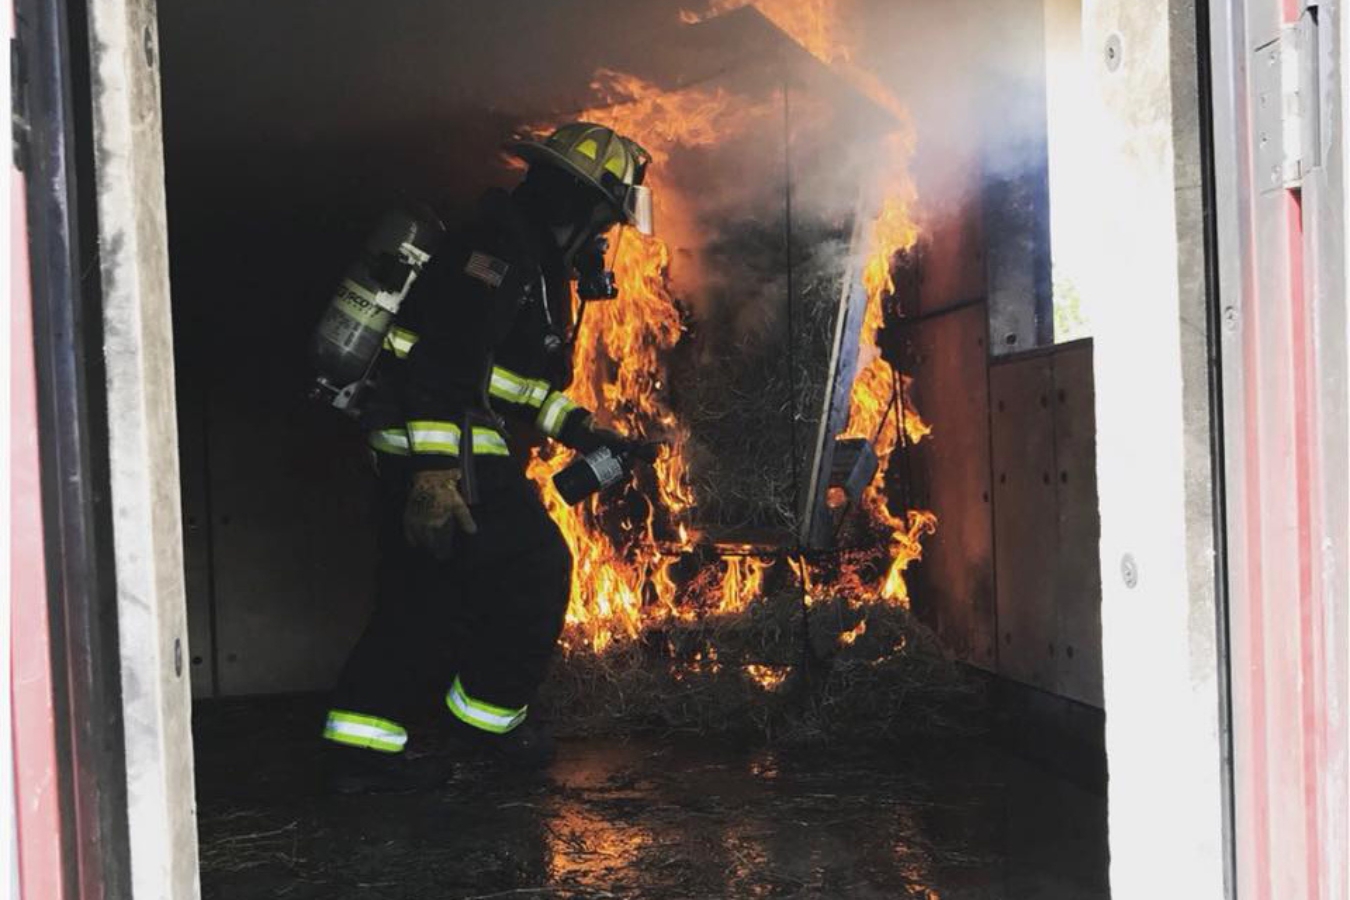 firefighter student participates in a training activity that involves navigating a burning building